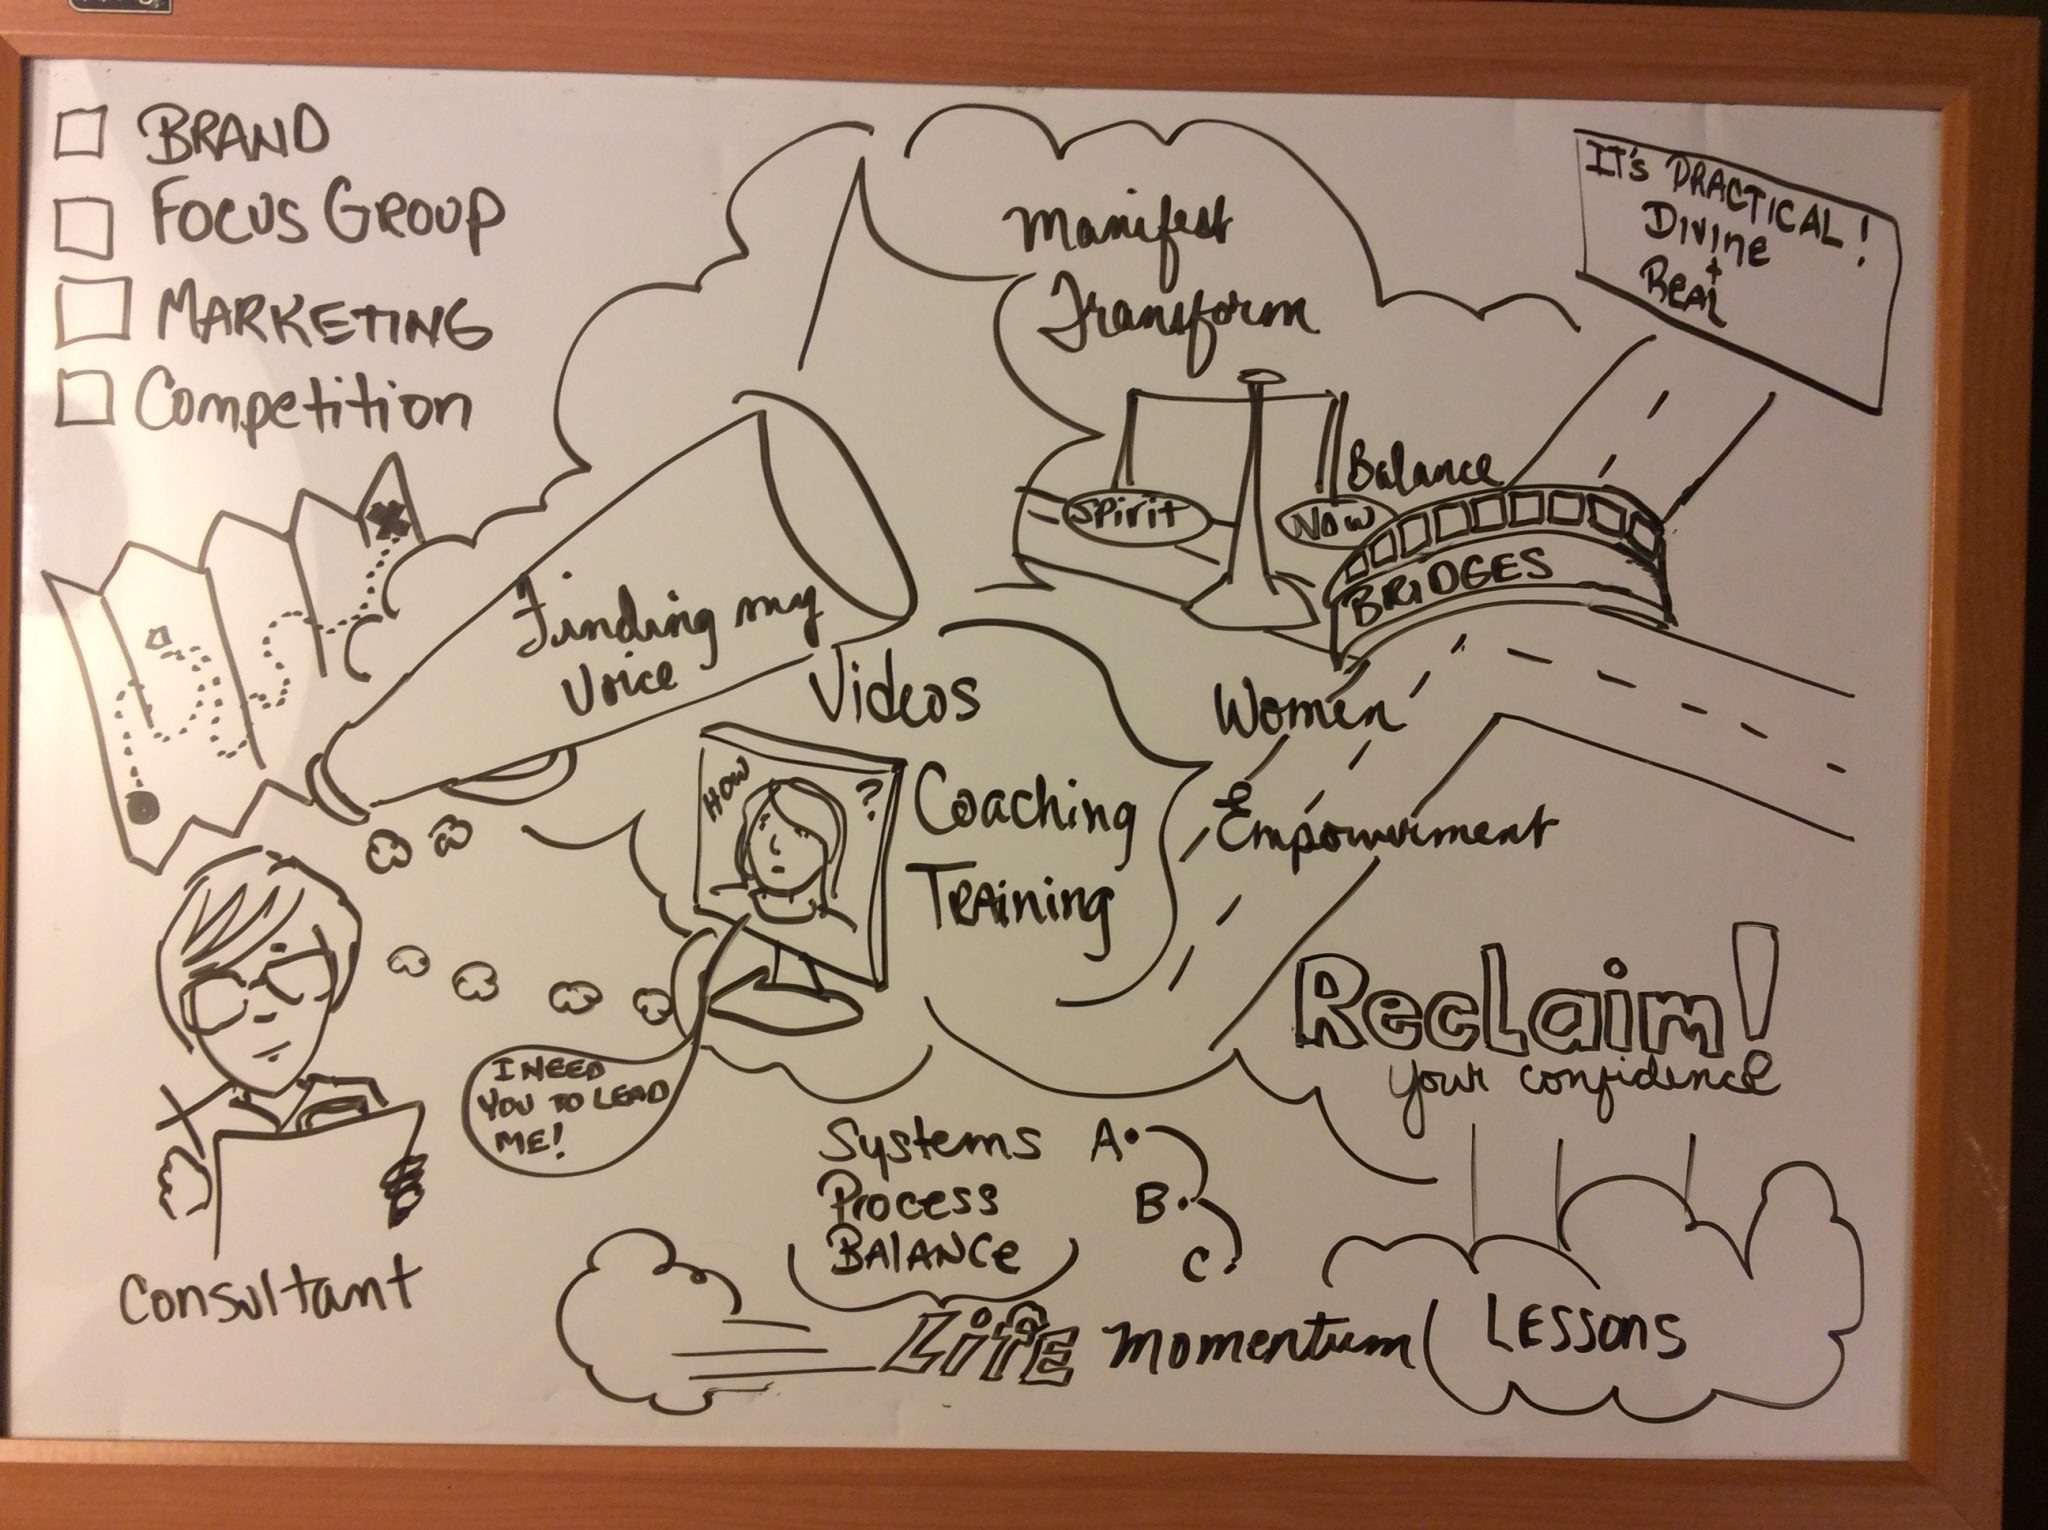 Graphic recording from coaching session